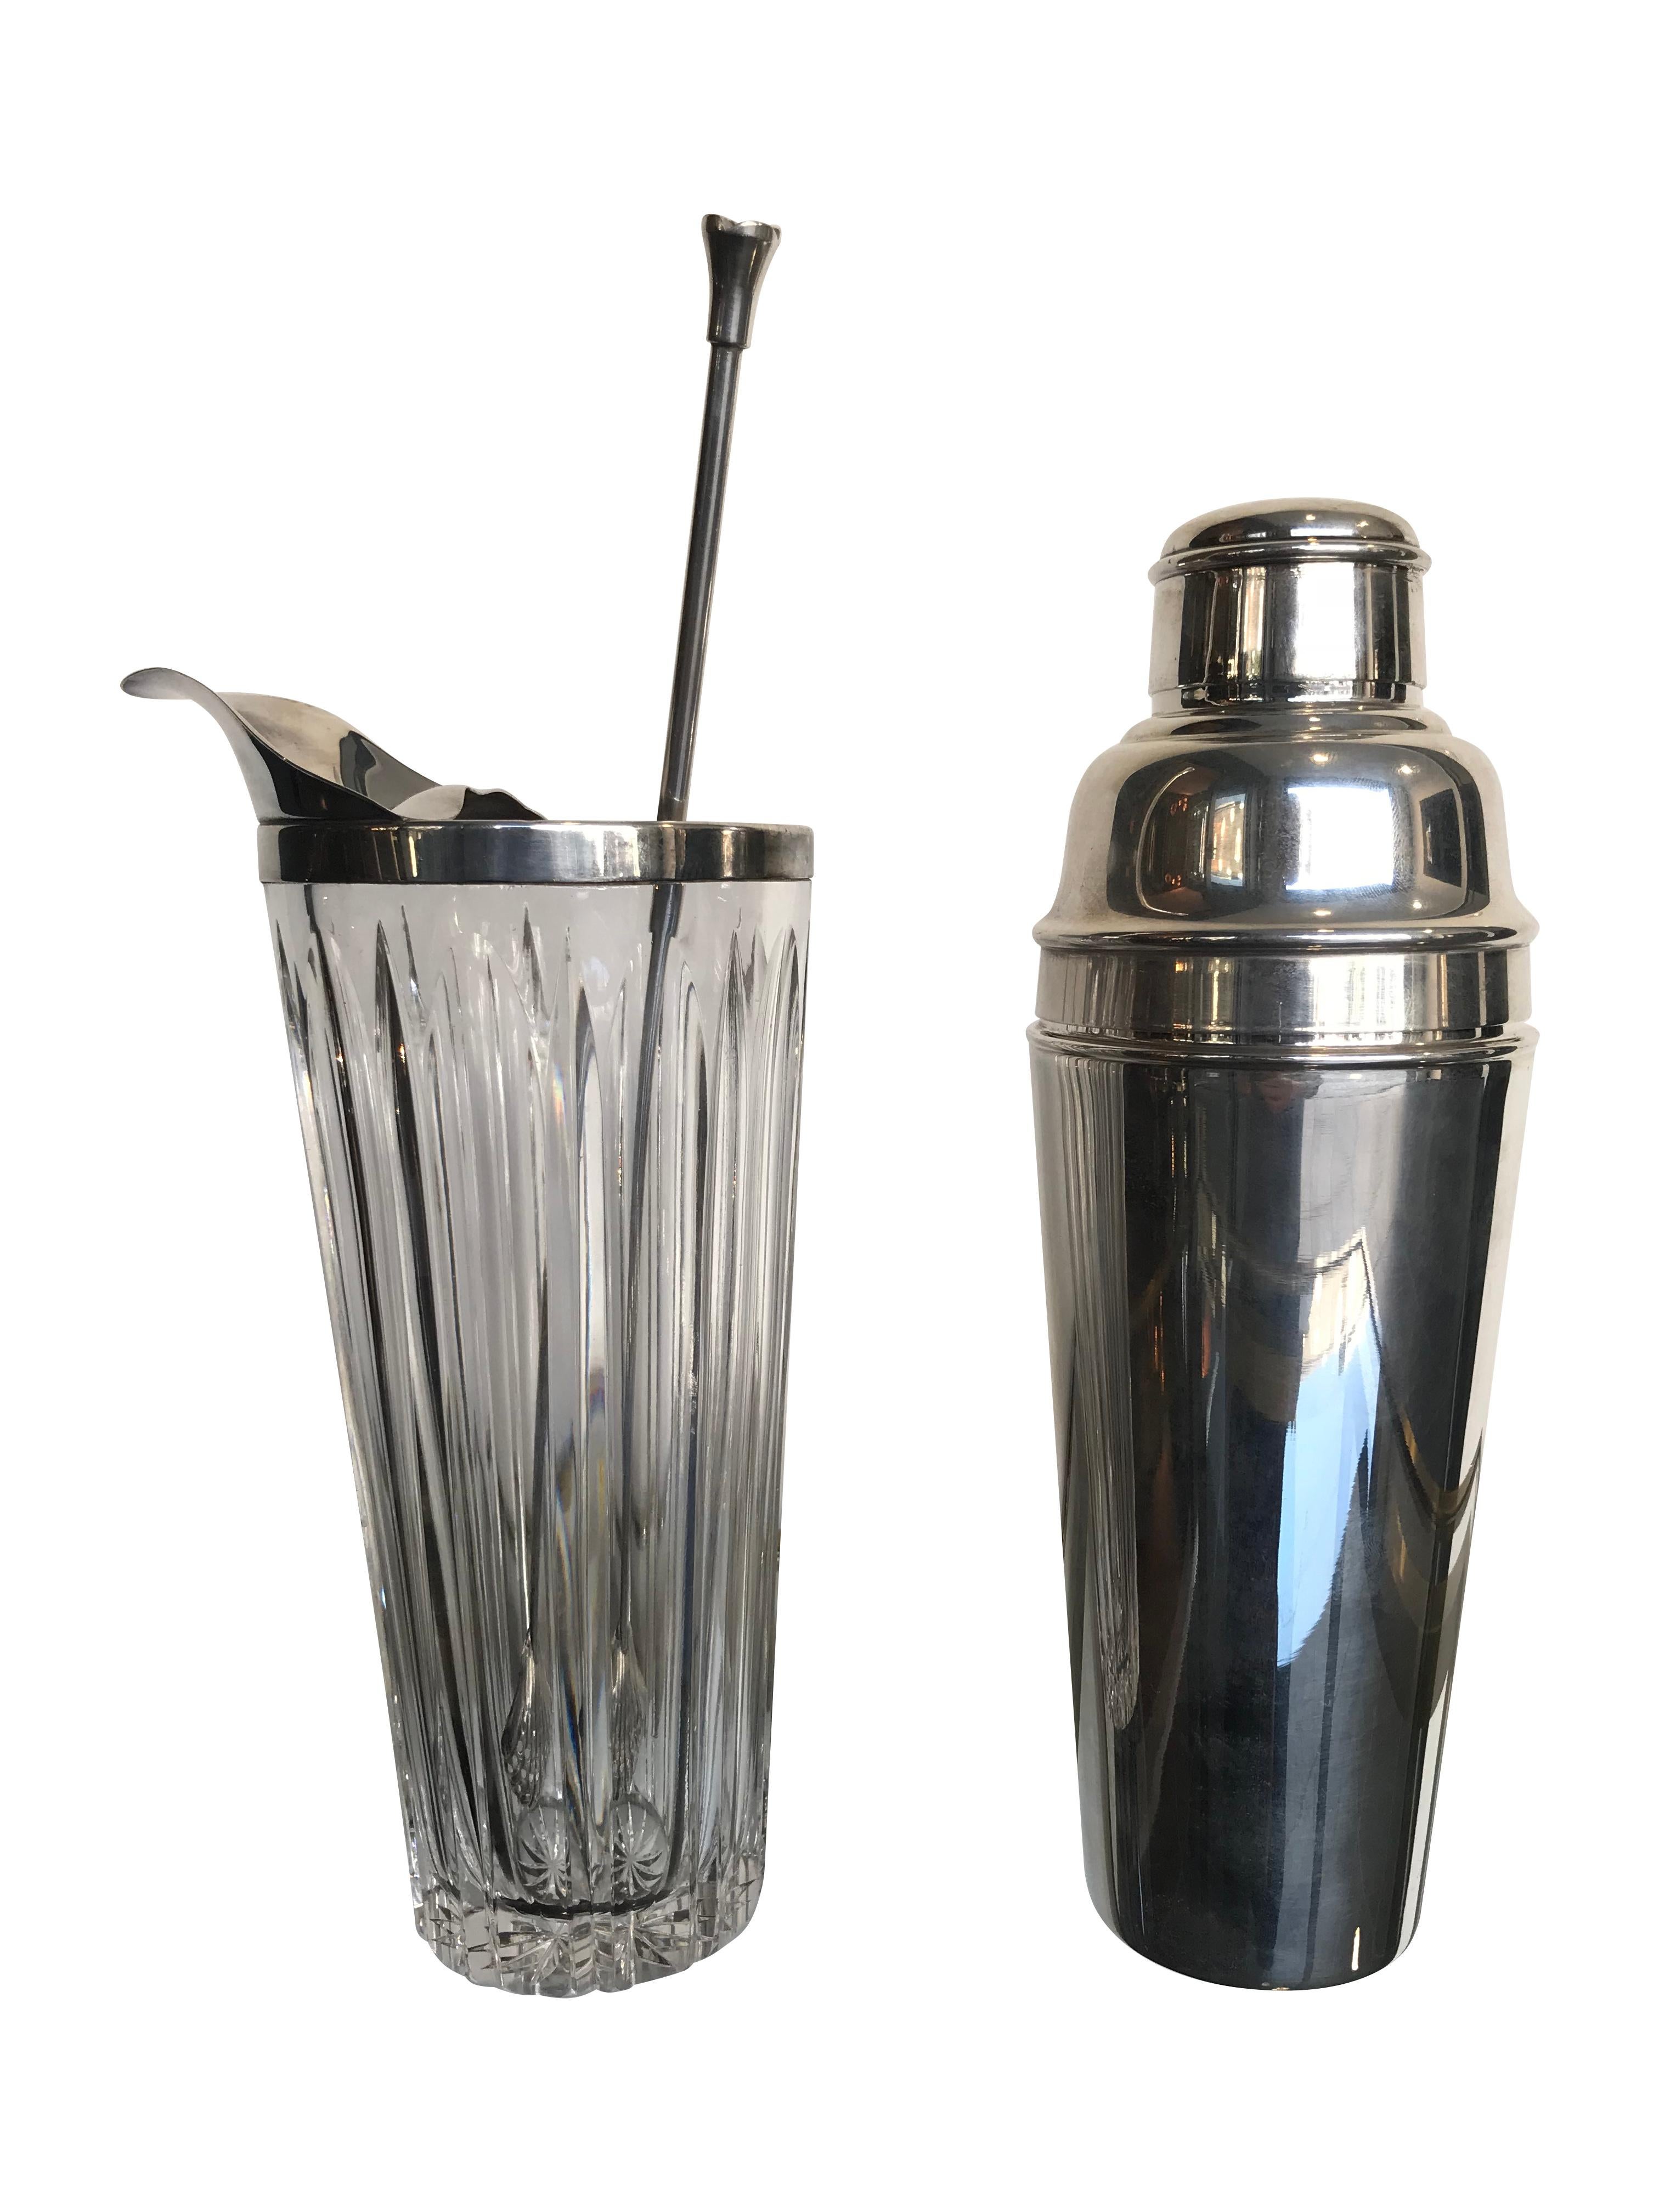 A stylish French crystal cocktail mixing jug, with Alpacca silver rim, pourer and strainer. Stamped on the rim 